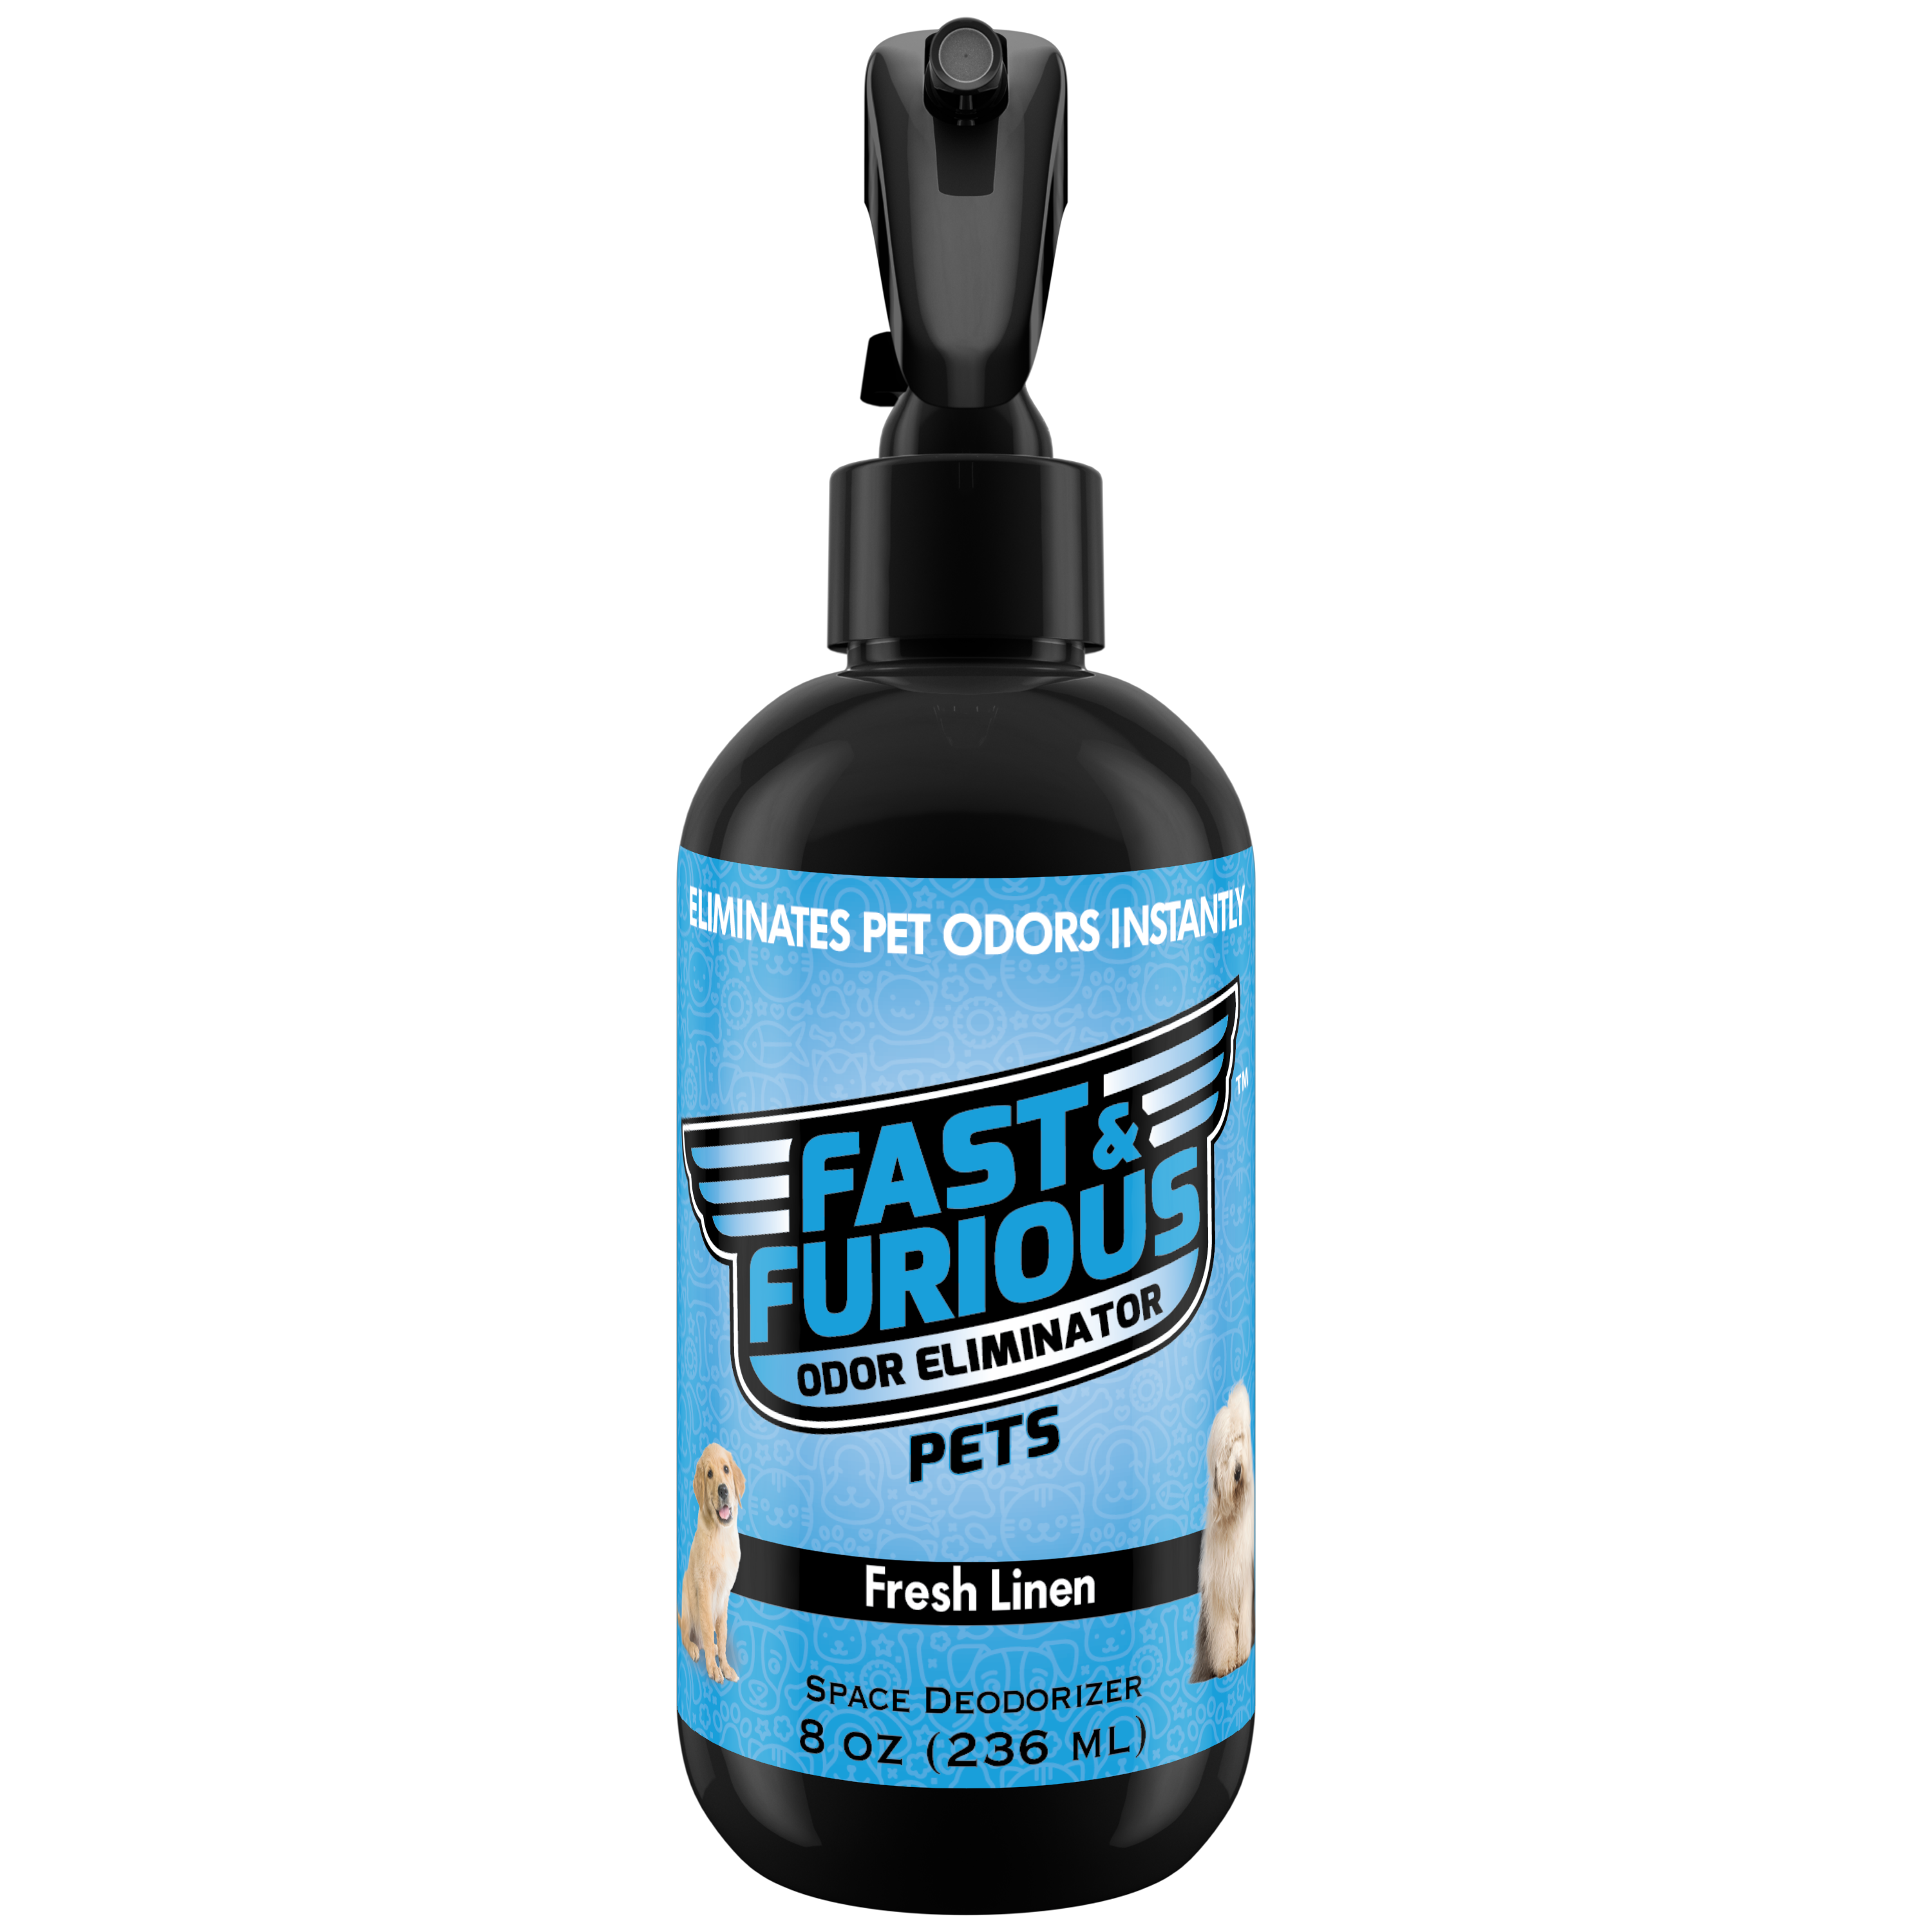 Fast and Furious Pets Odor Eliminator - Fresh Linen Scent